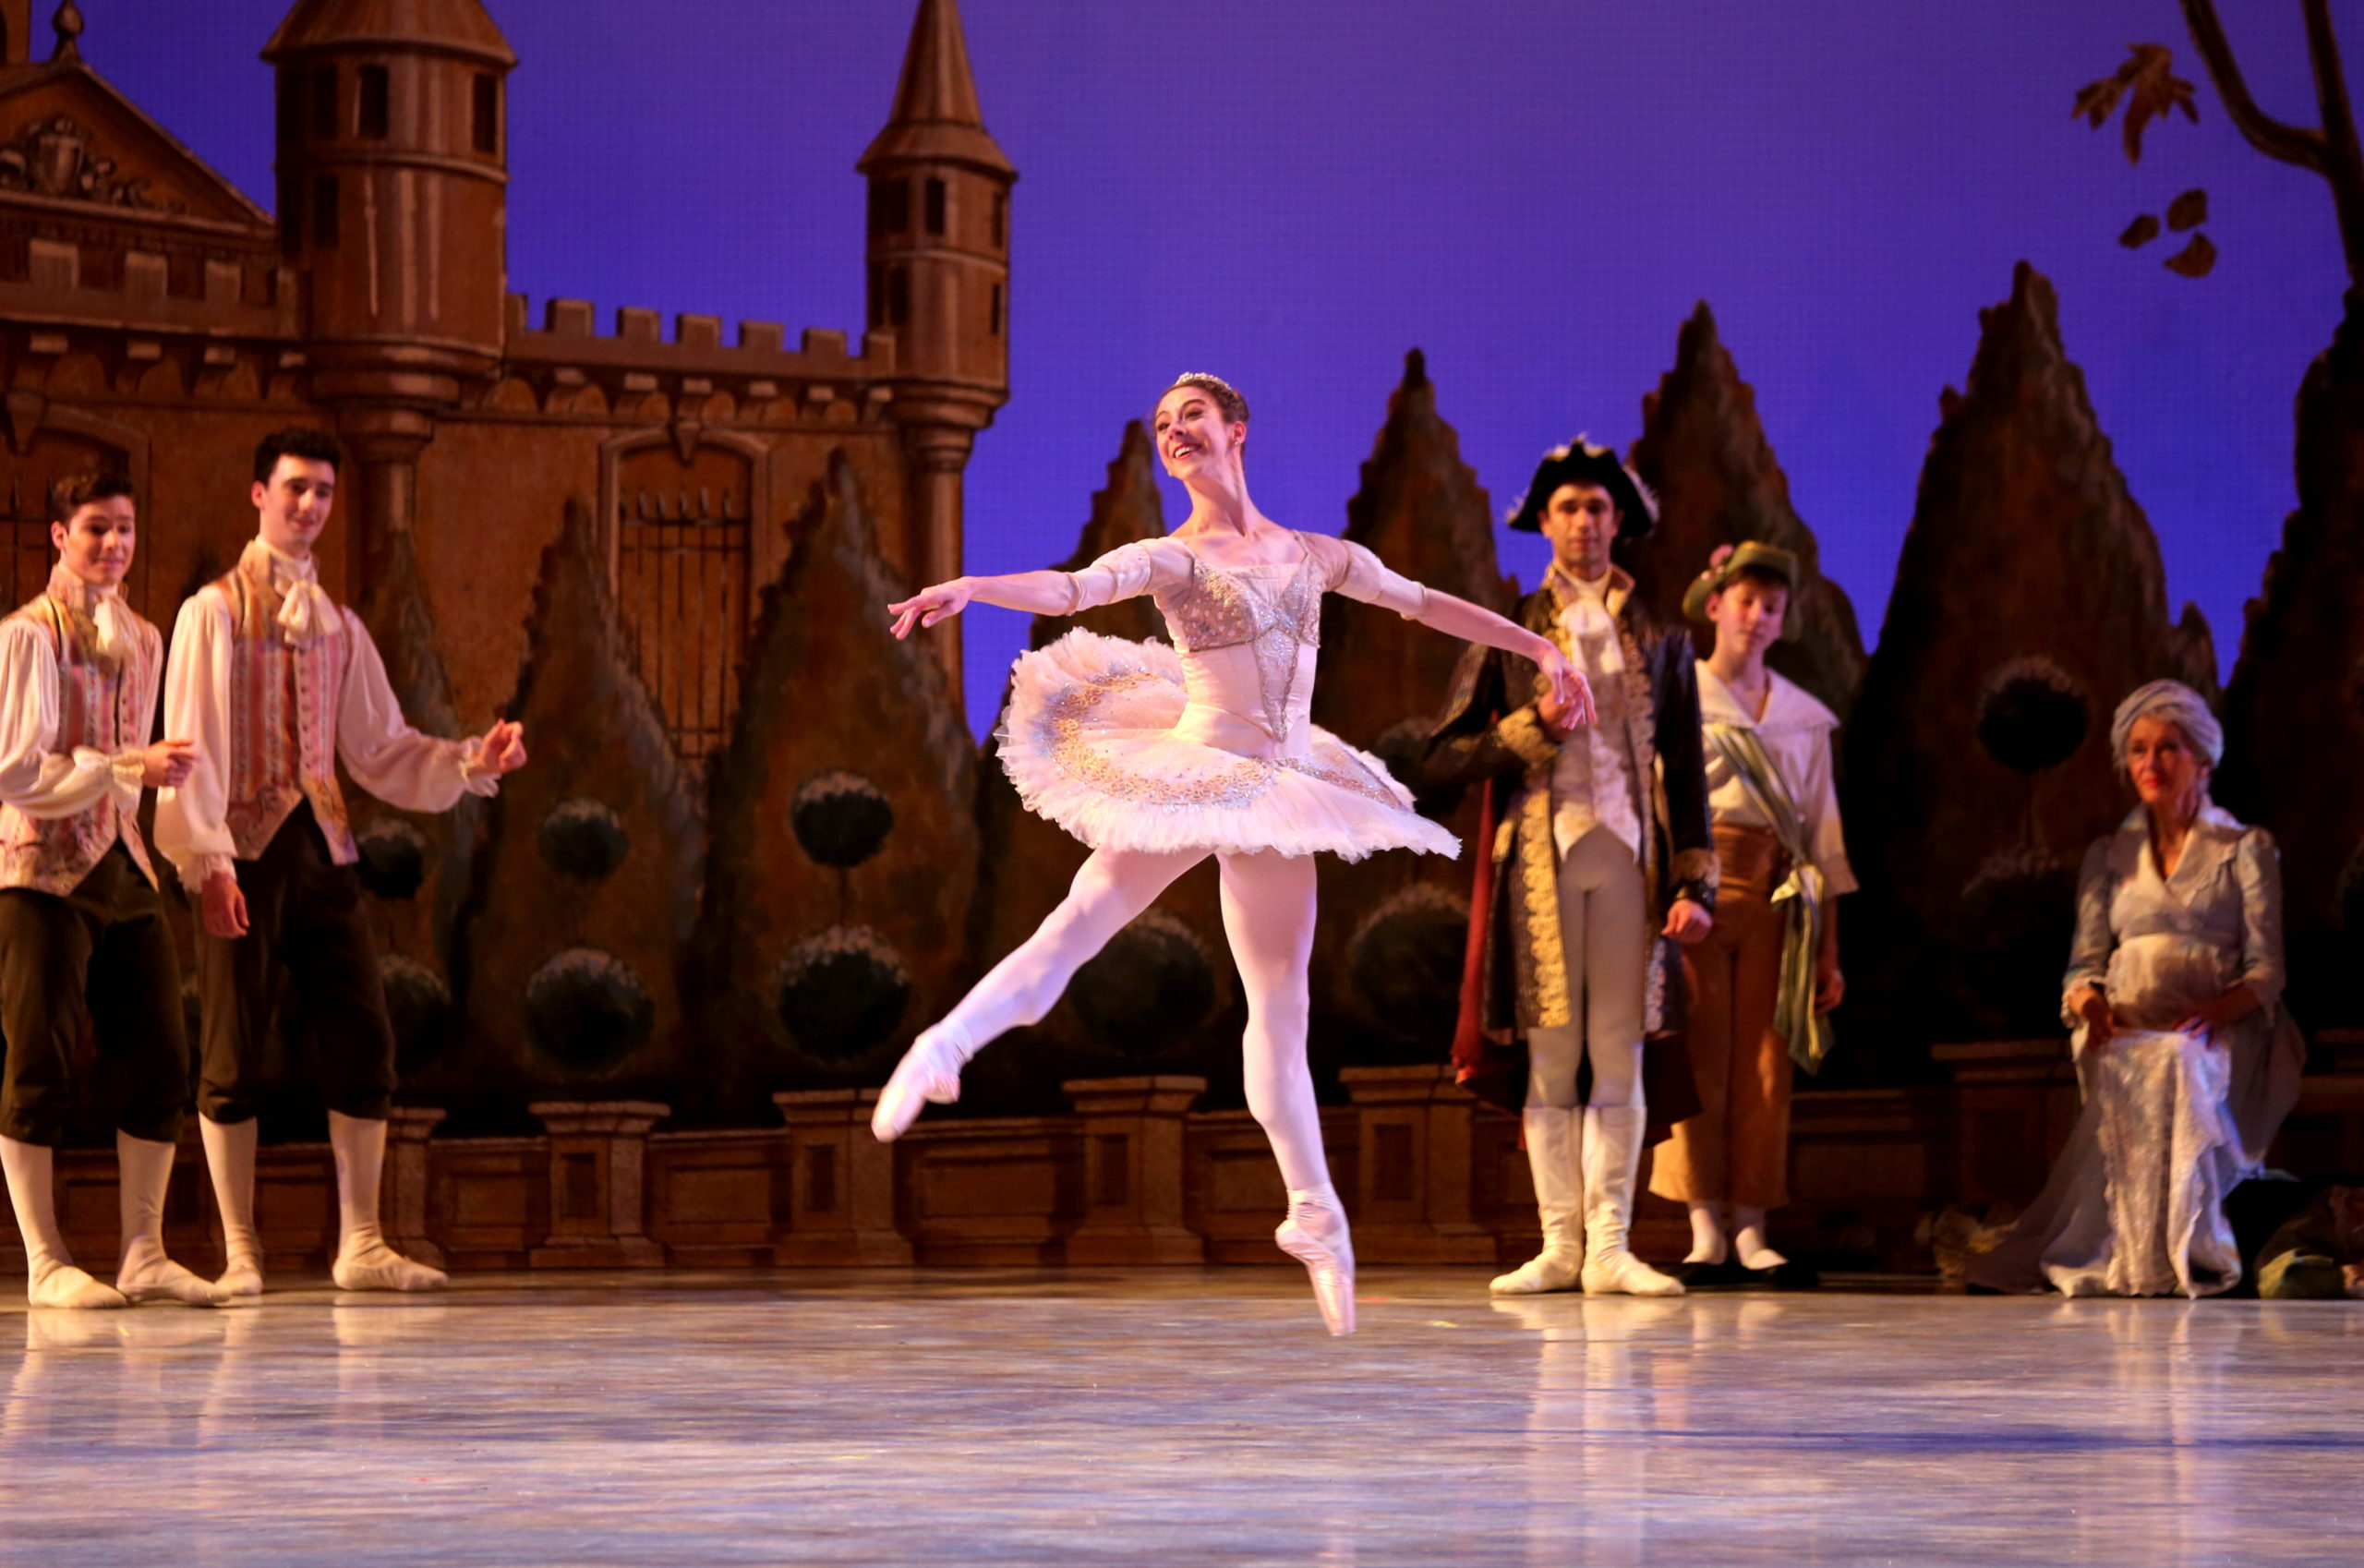 Cody Beaton dances in "The Sleeping Beauty", choreography from Marius Petipa with staging by Malcolm Burn..